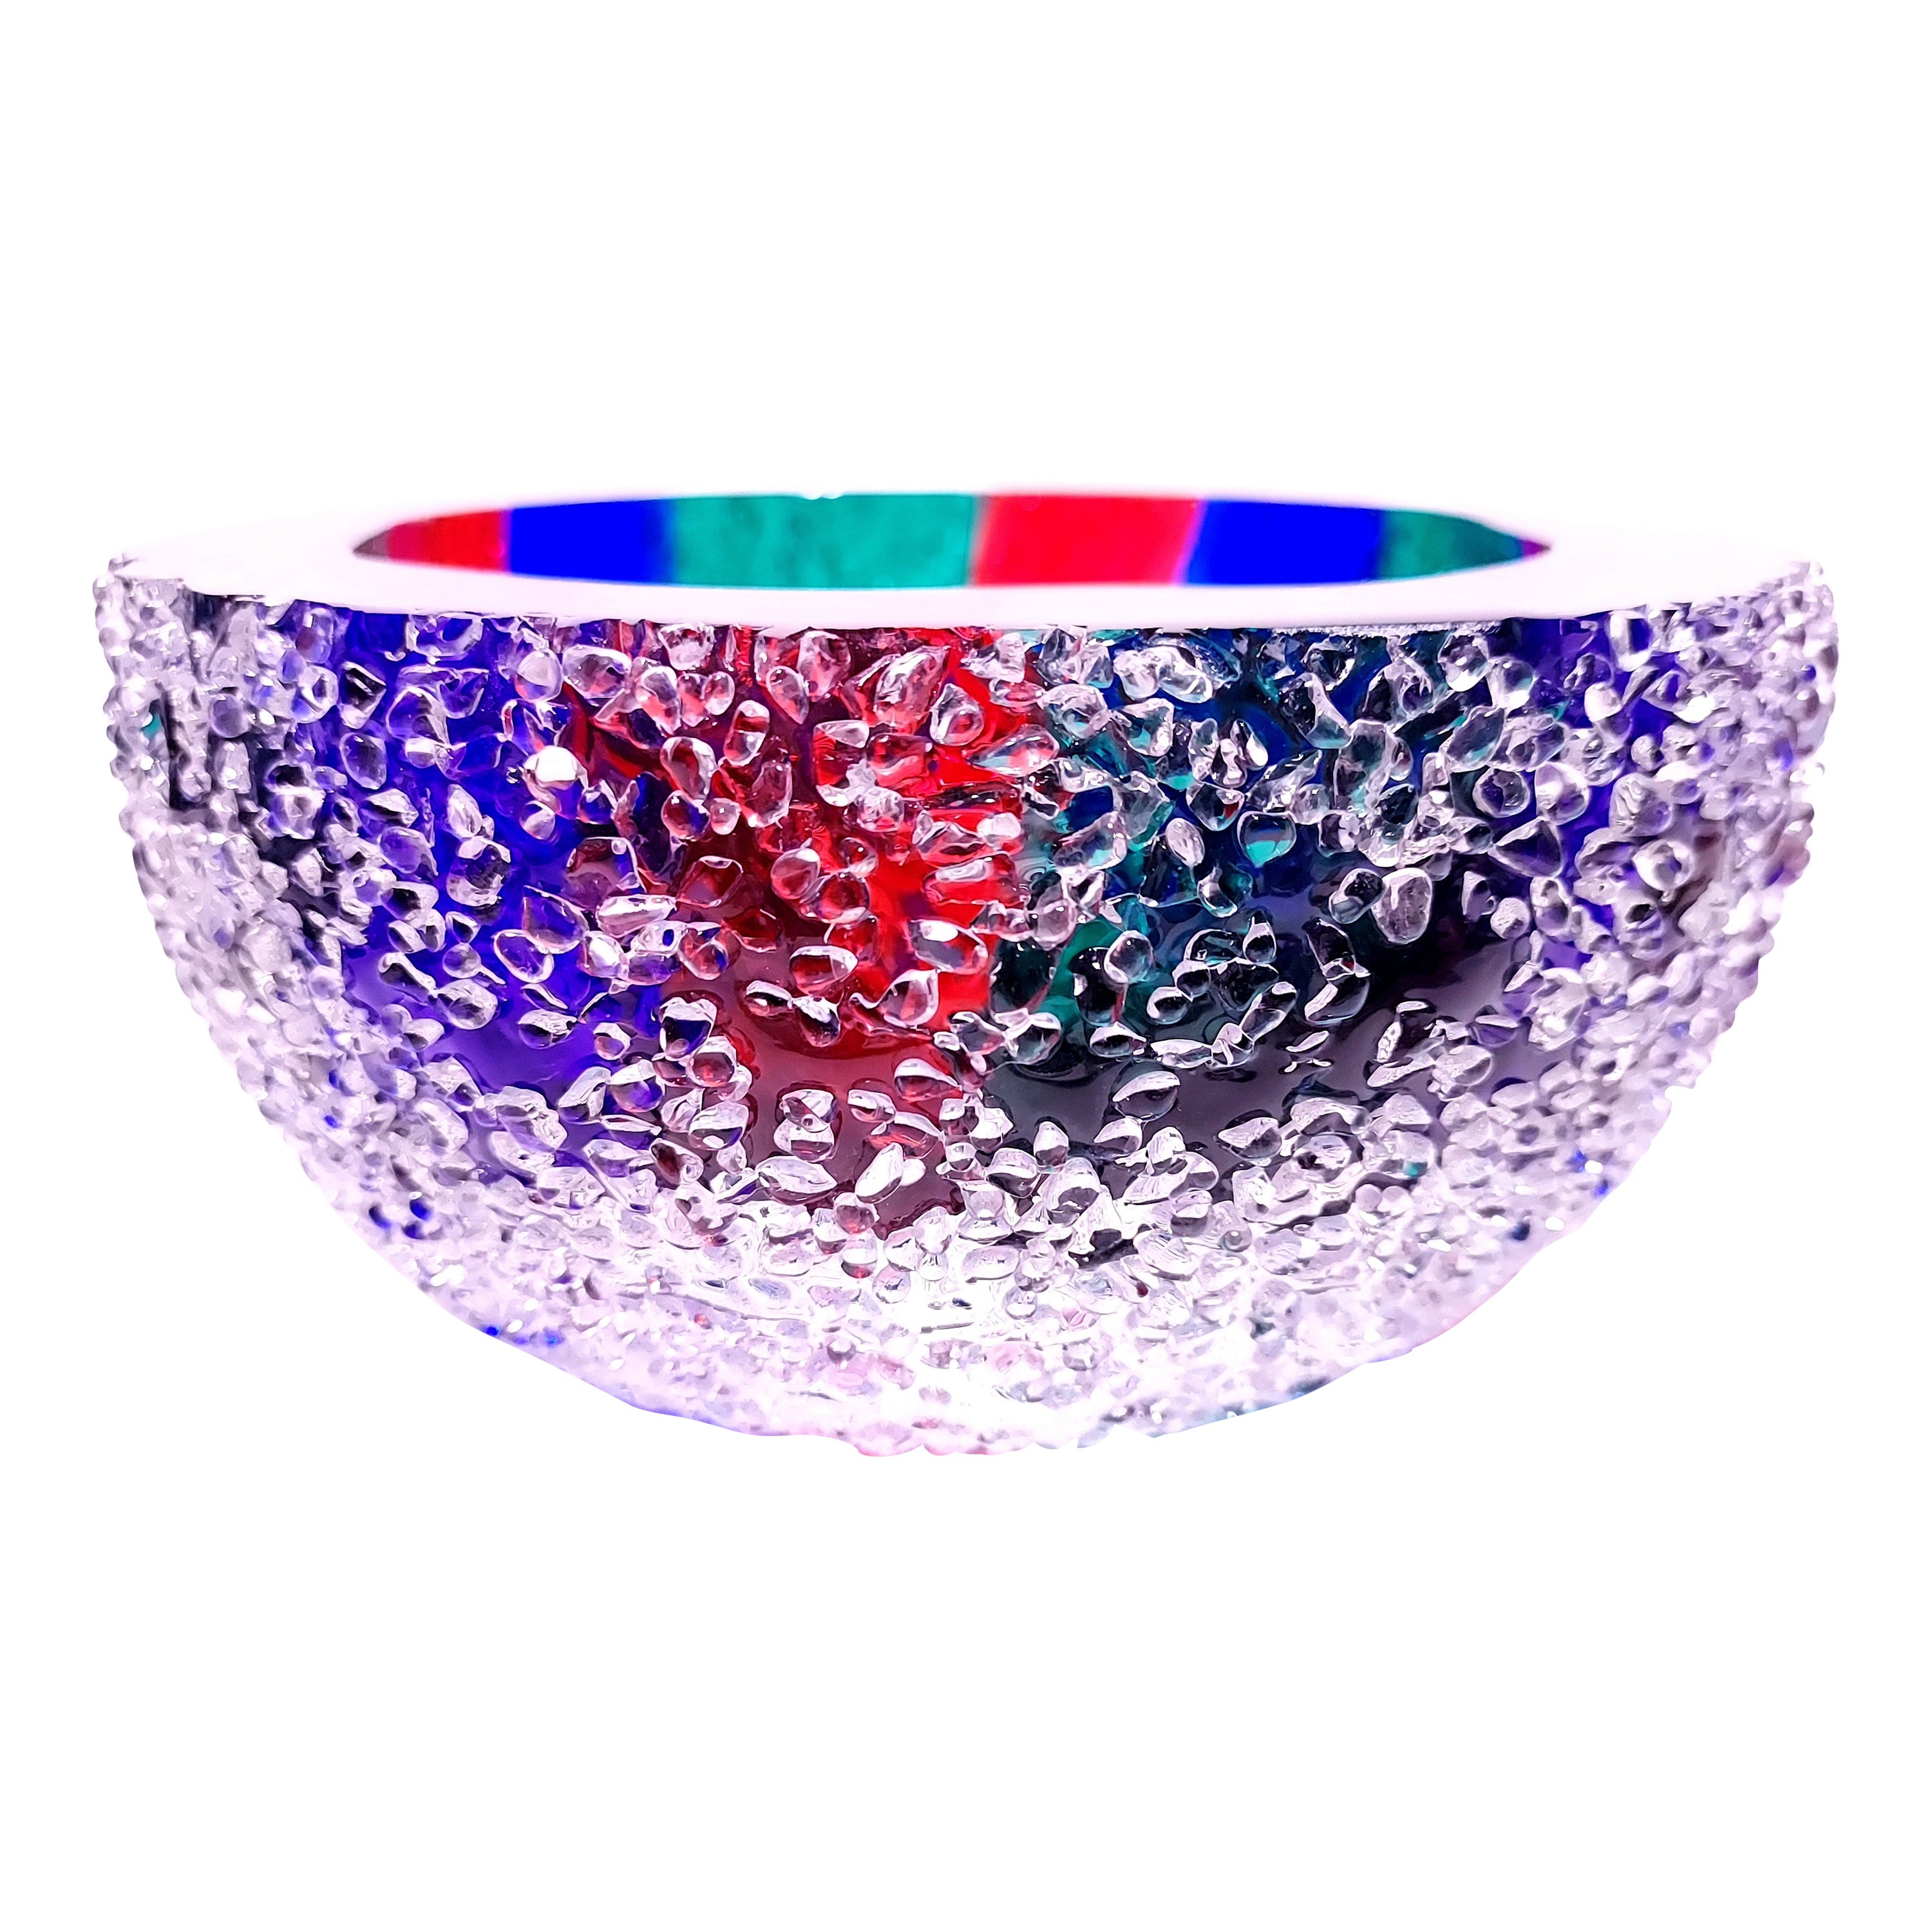 RGB Crystal Color Bowl, Handmade Contemporary Luxury Glass Vessel For Sale